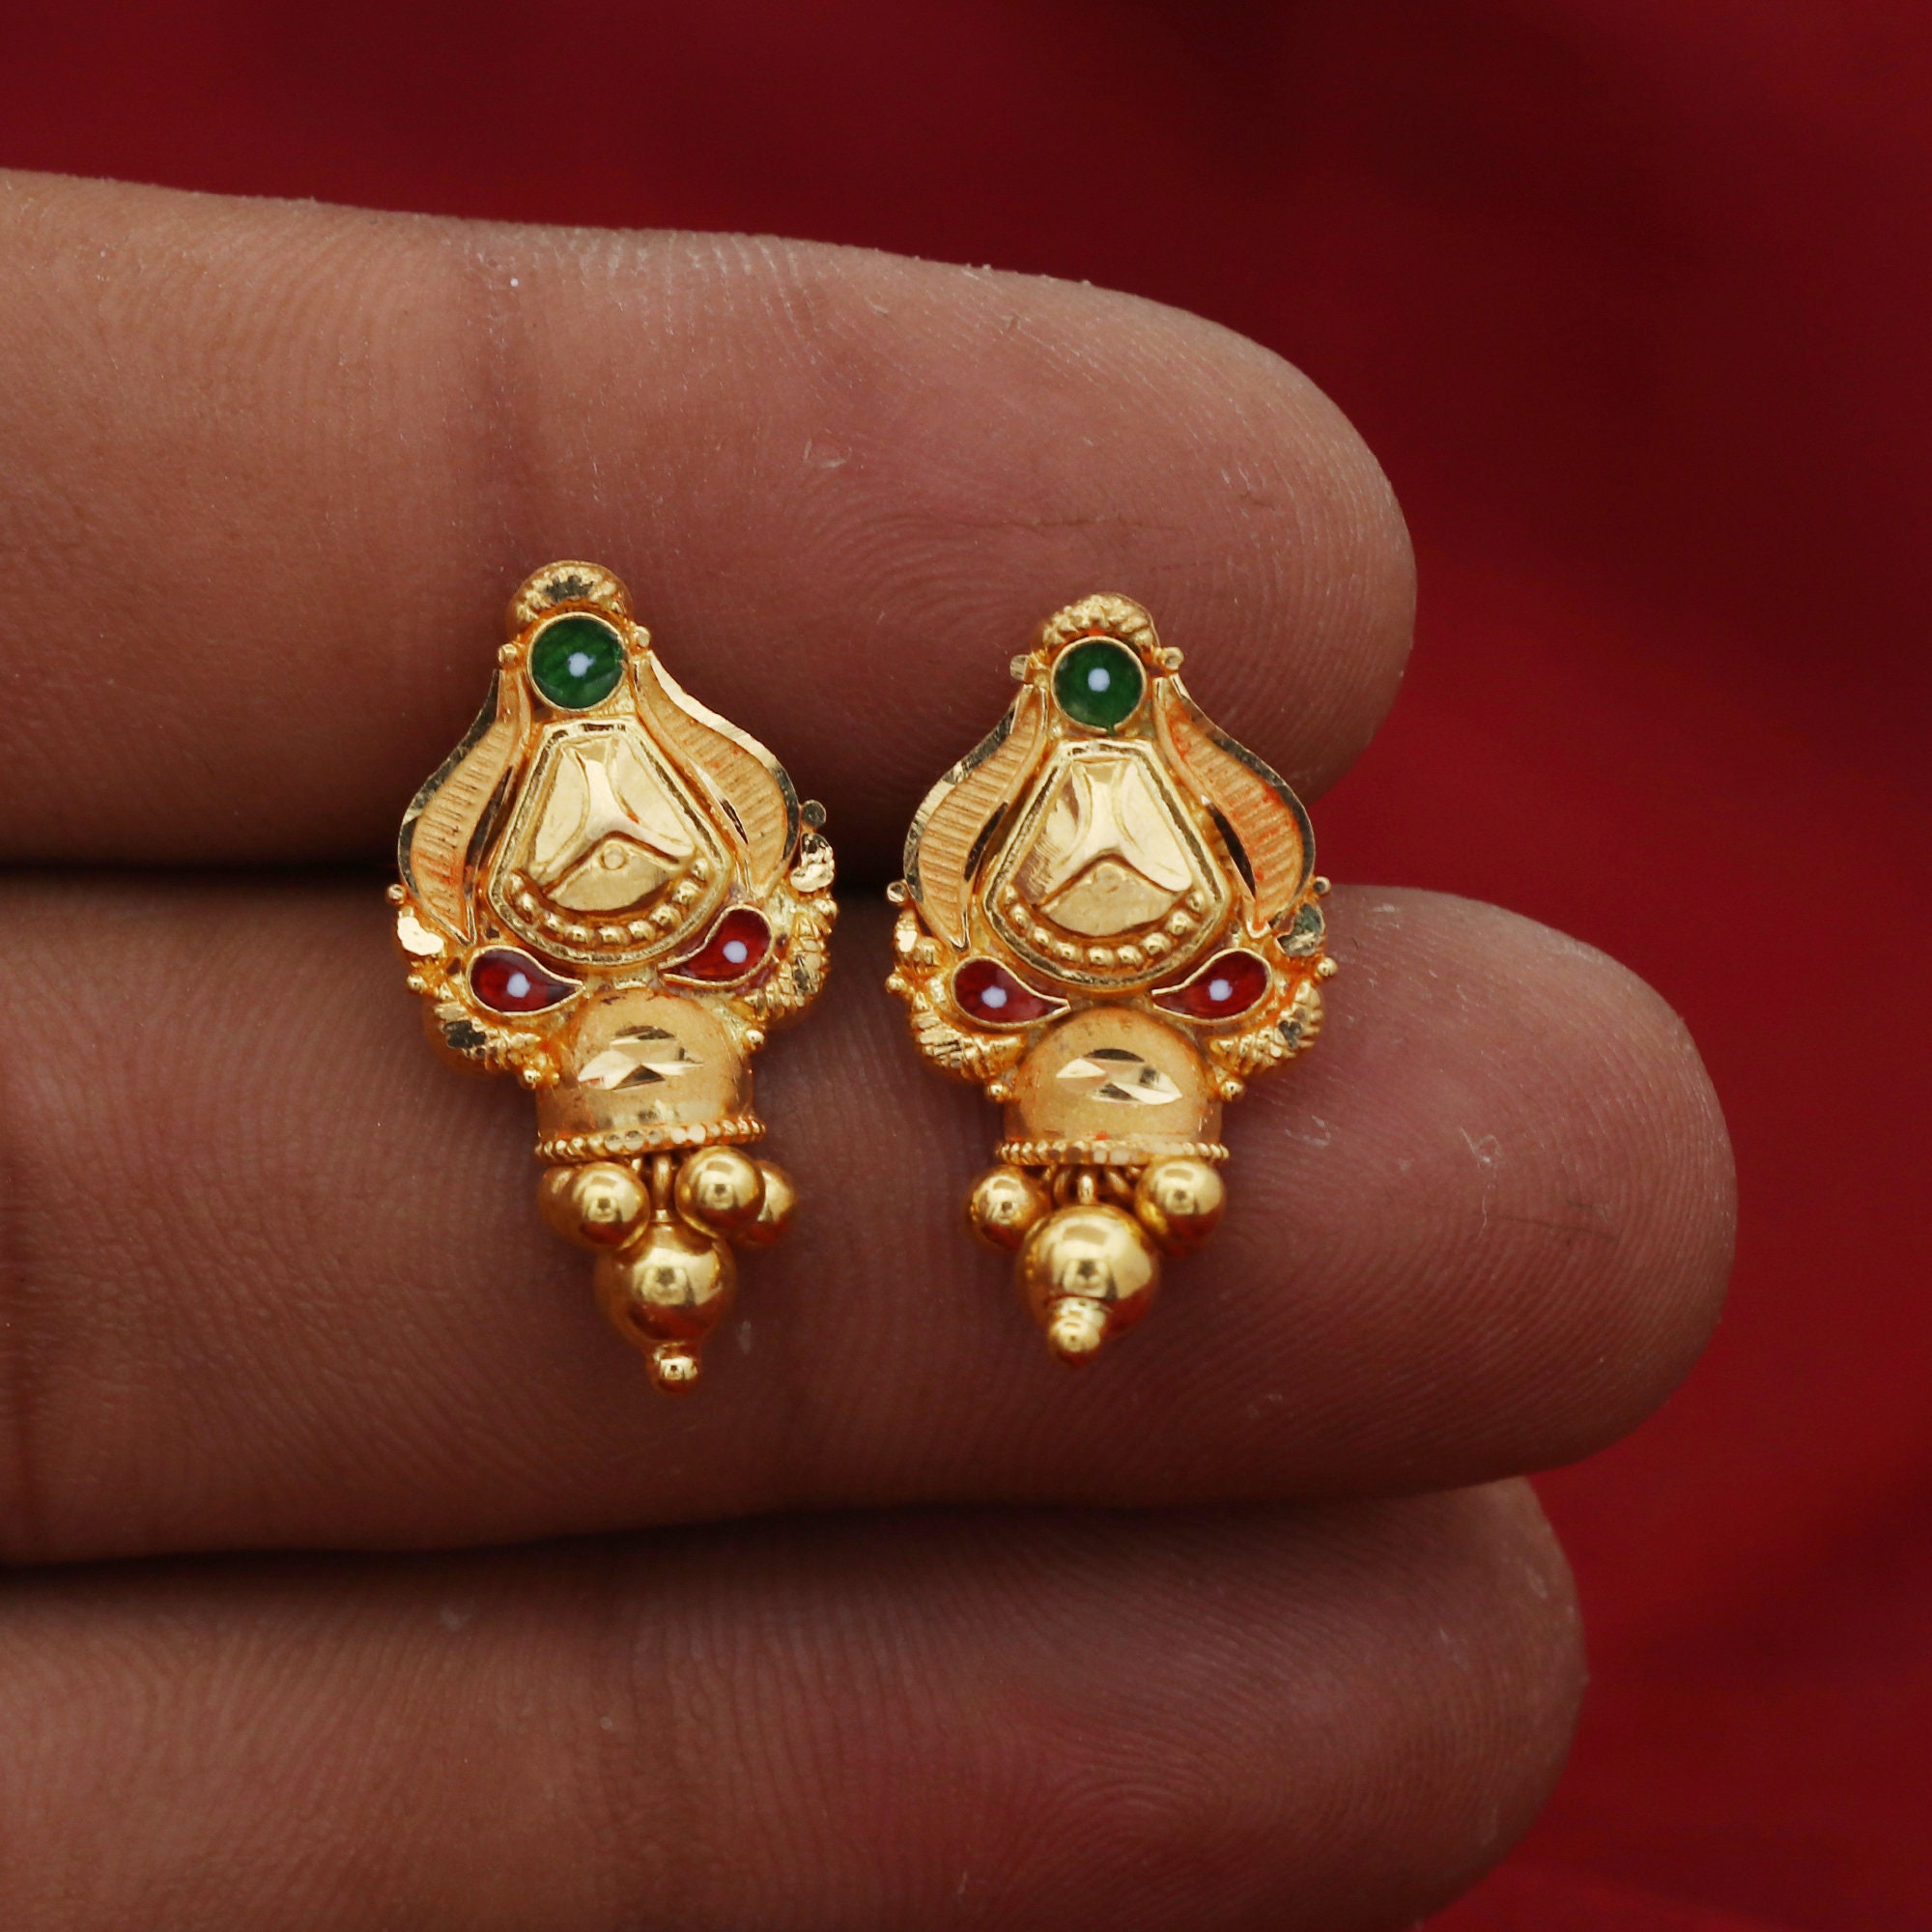 Buy quality Latest Design Gold Earrings in Ahmedabad